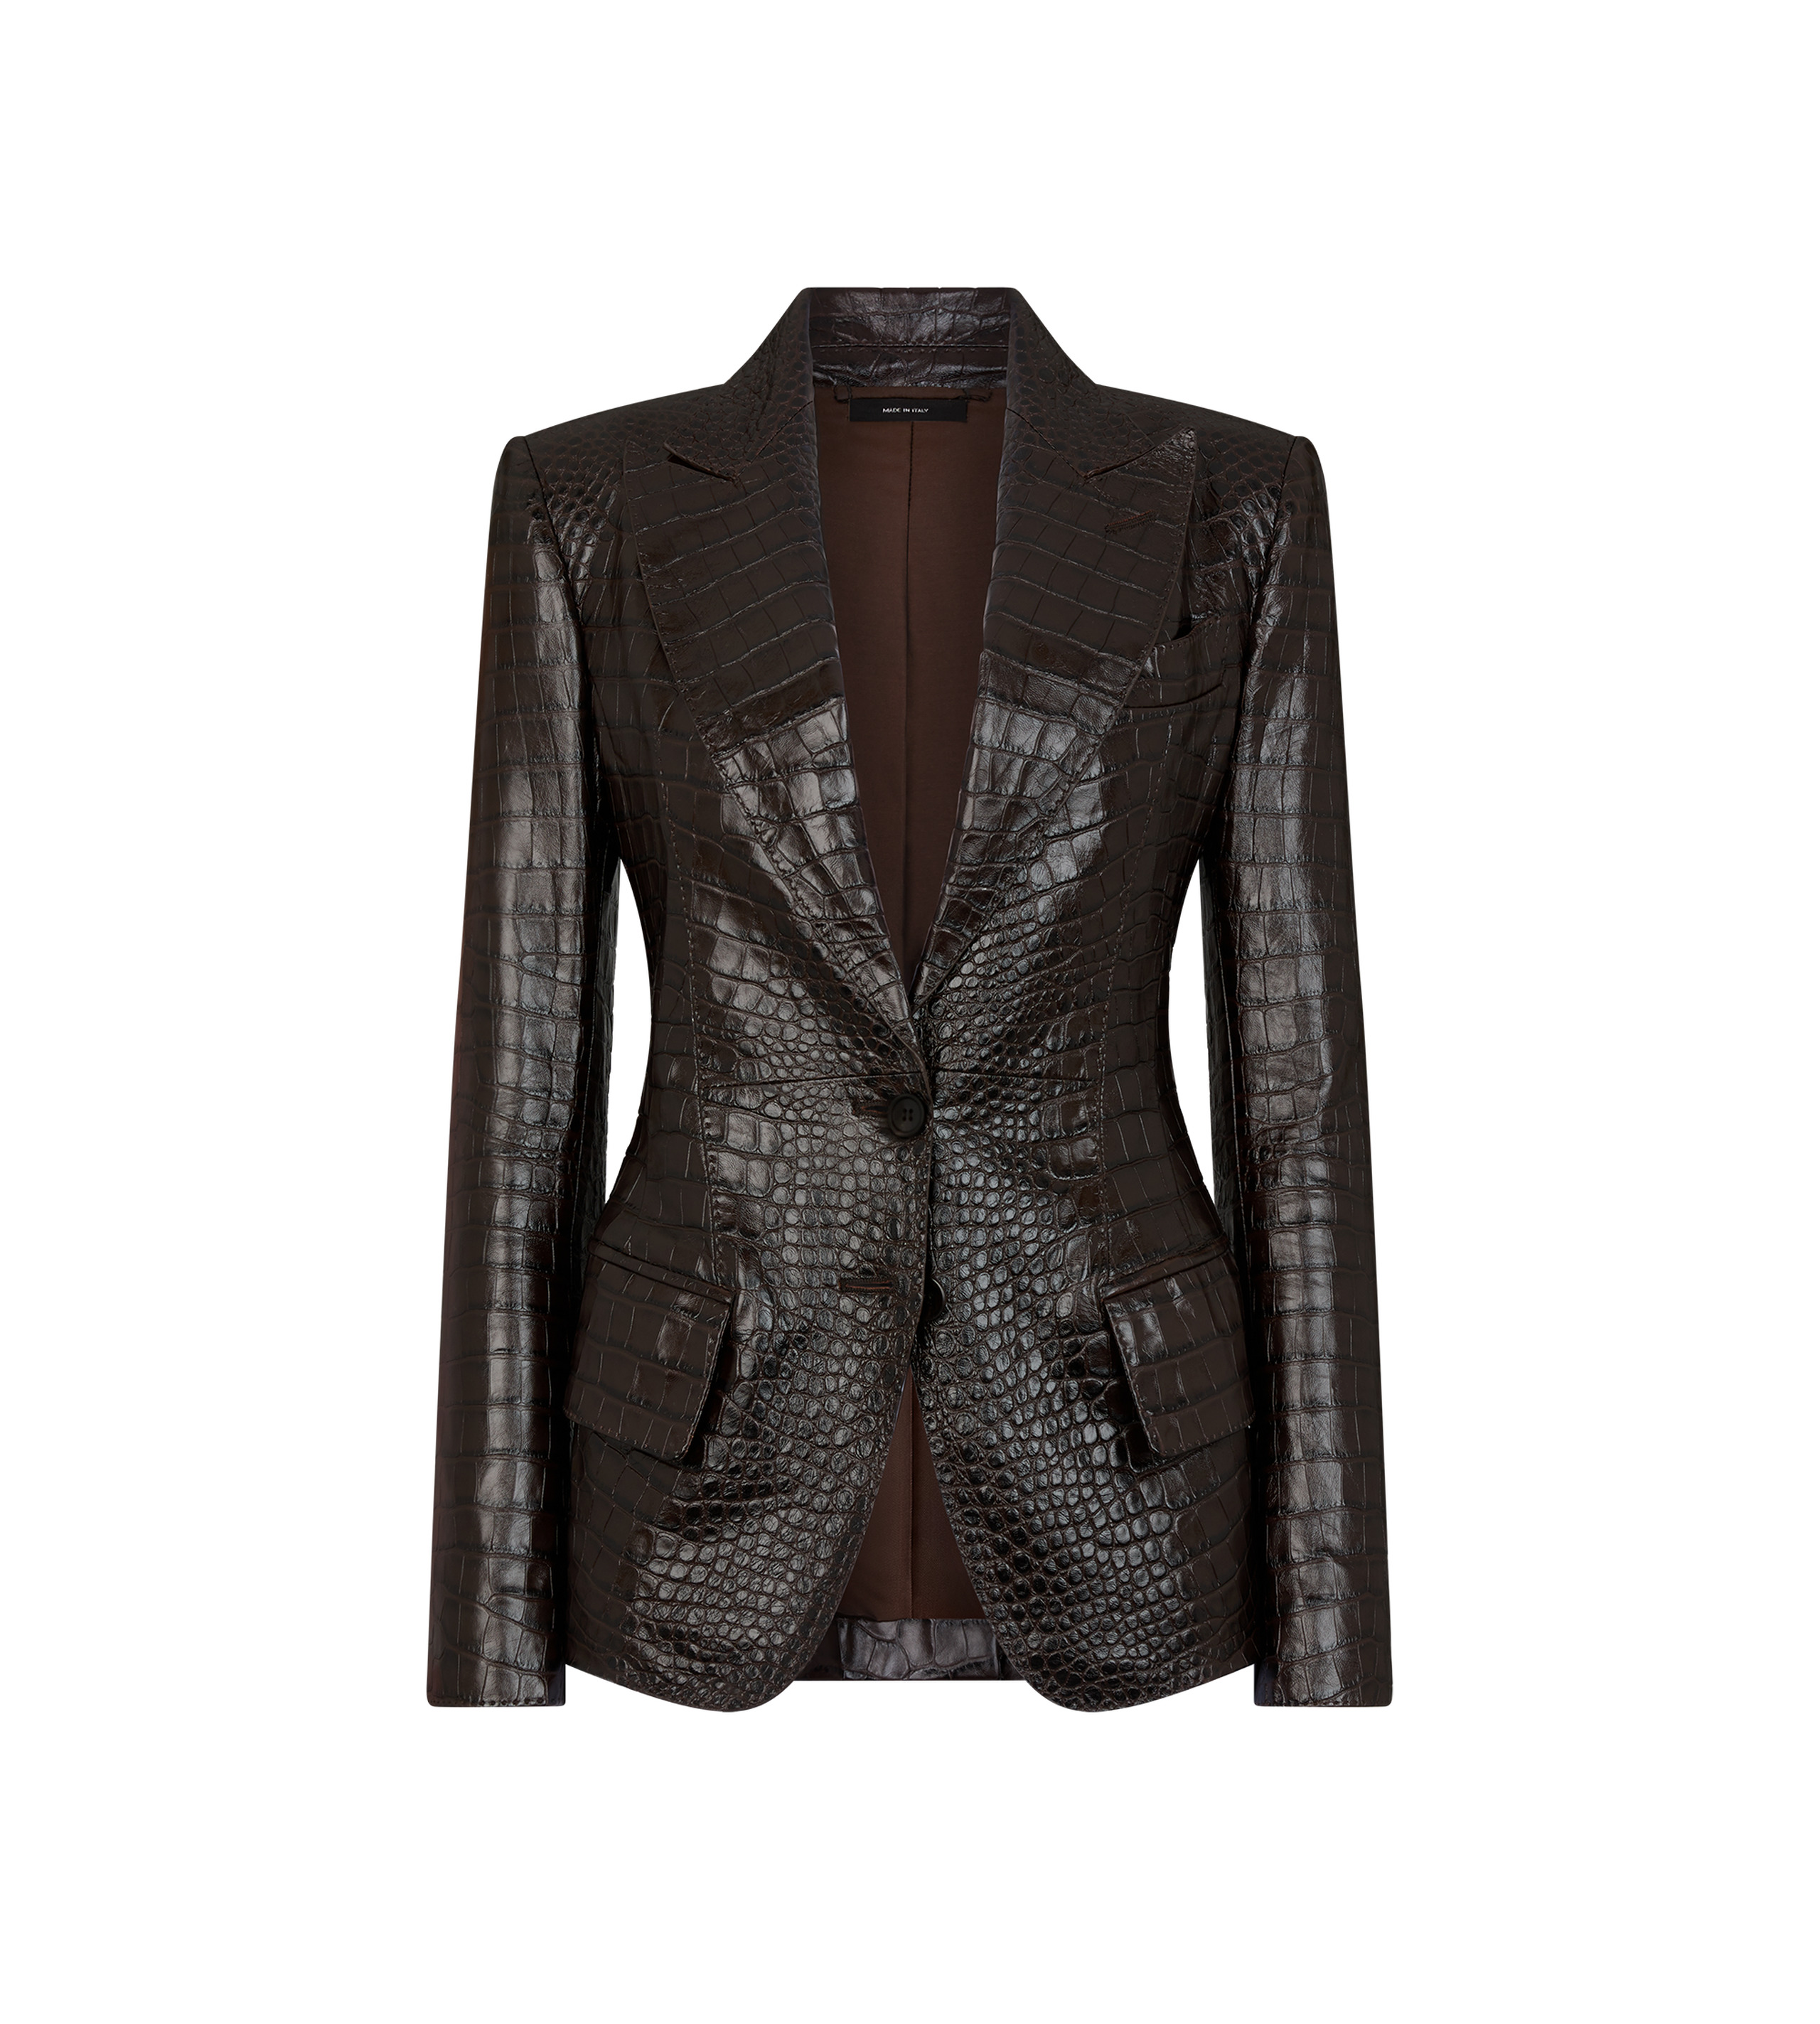 EMBOSSED LEATHER "JACQUETTA" JACKET - 1